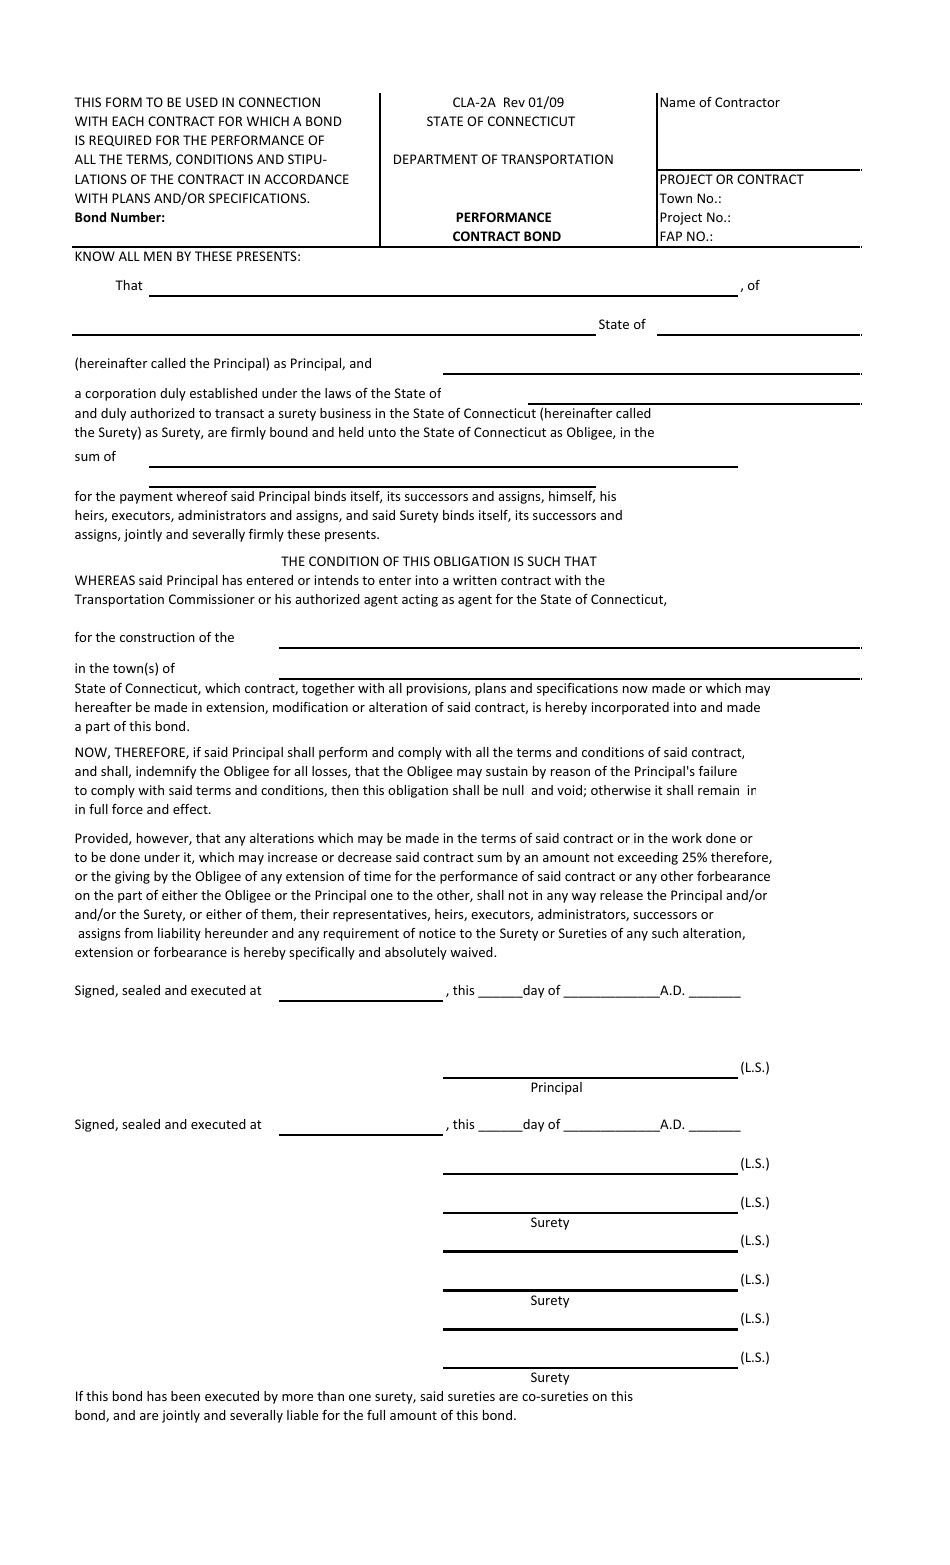 Form CLA-2A Performance Contract Bond - Connecticut, Page 1